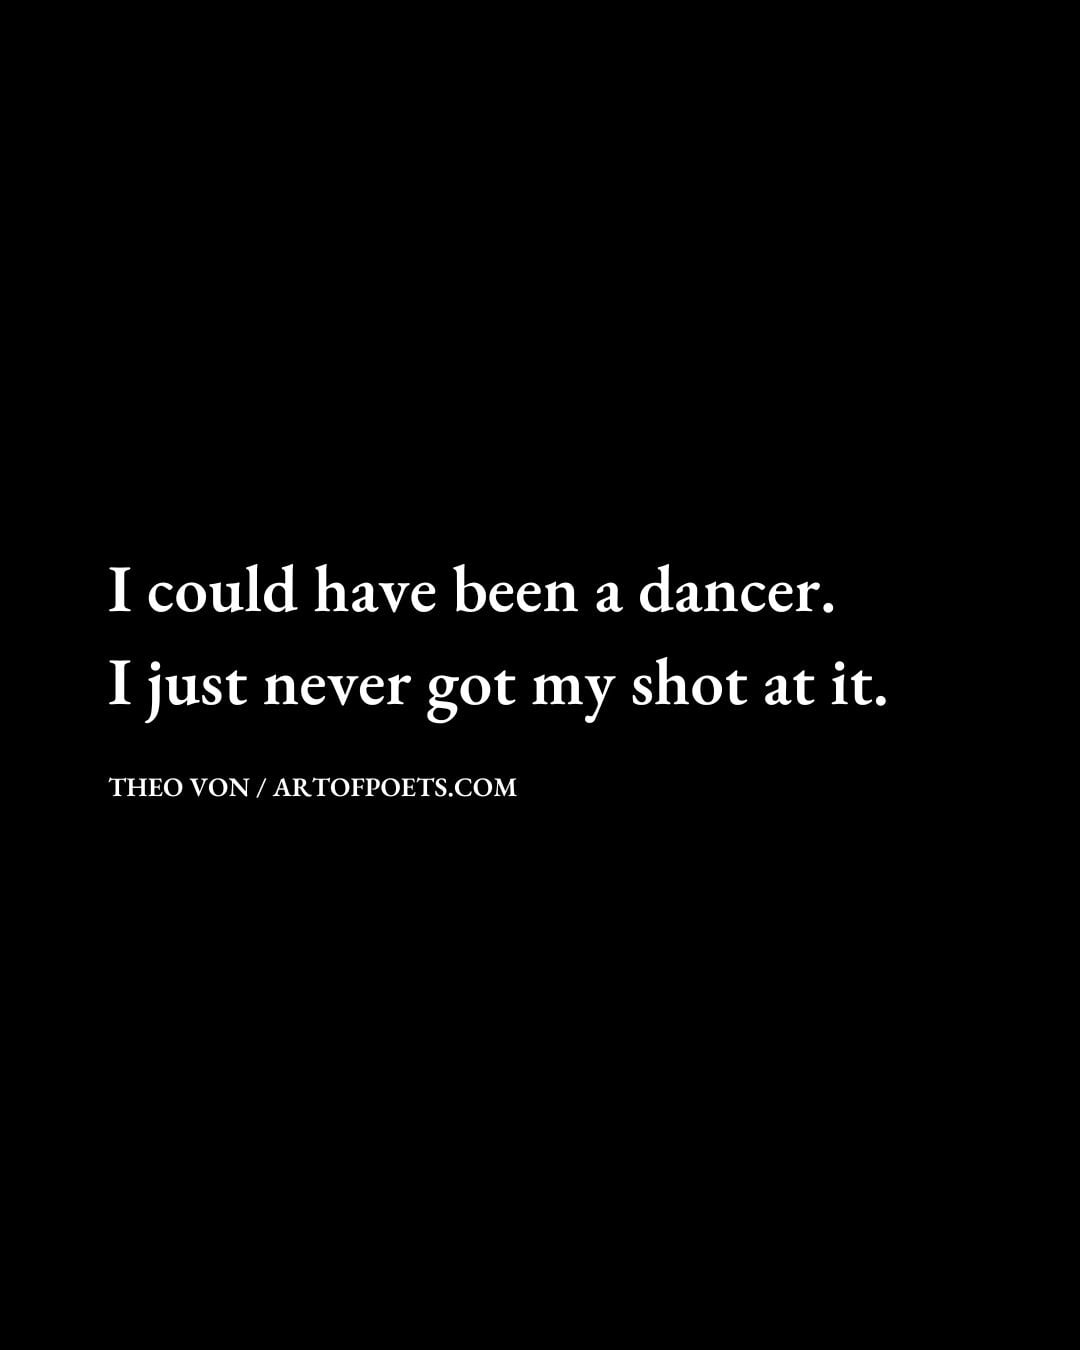 I could have been a dancer. I just never got my shot at it